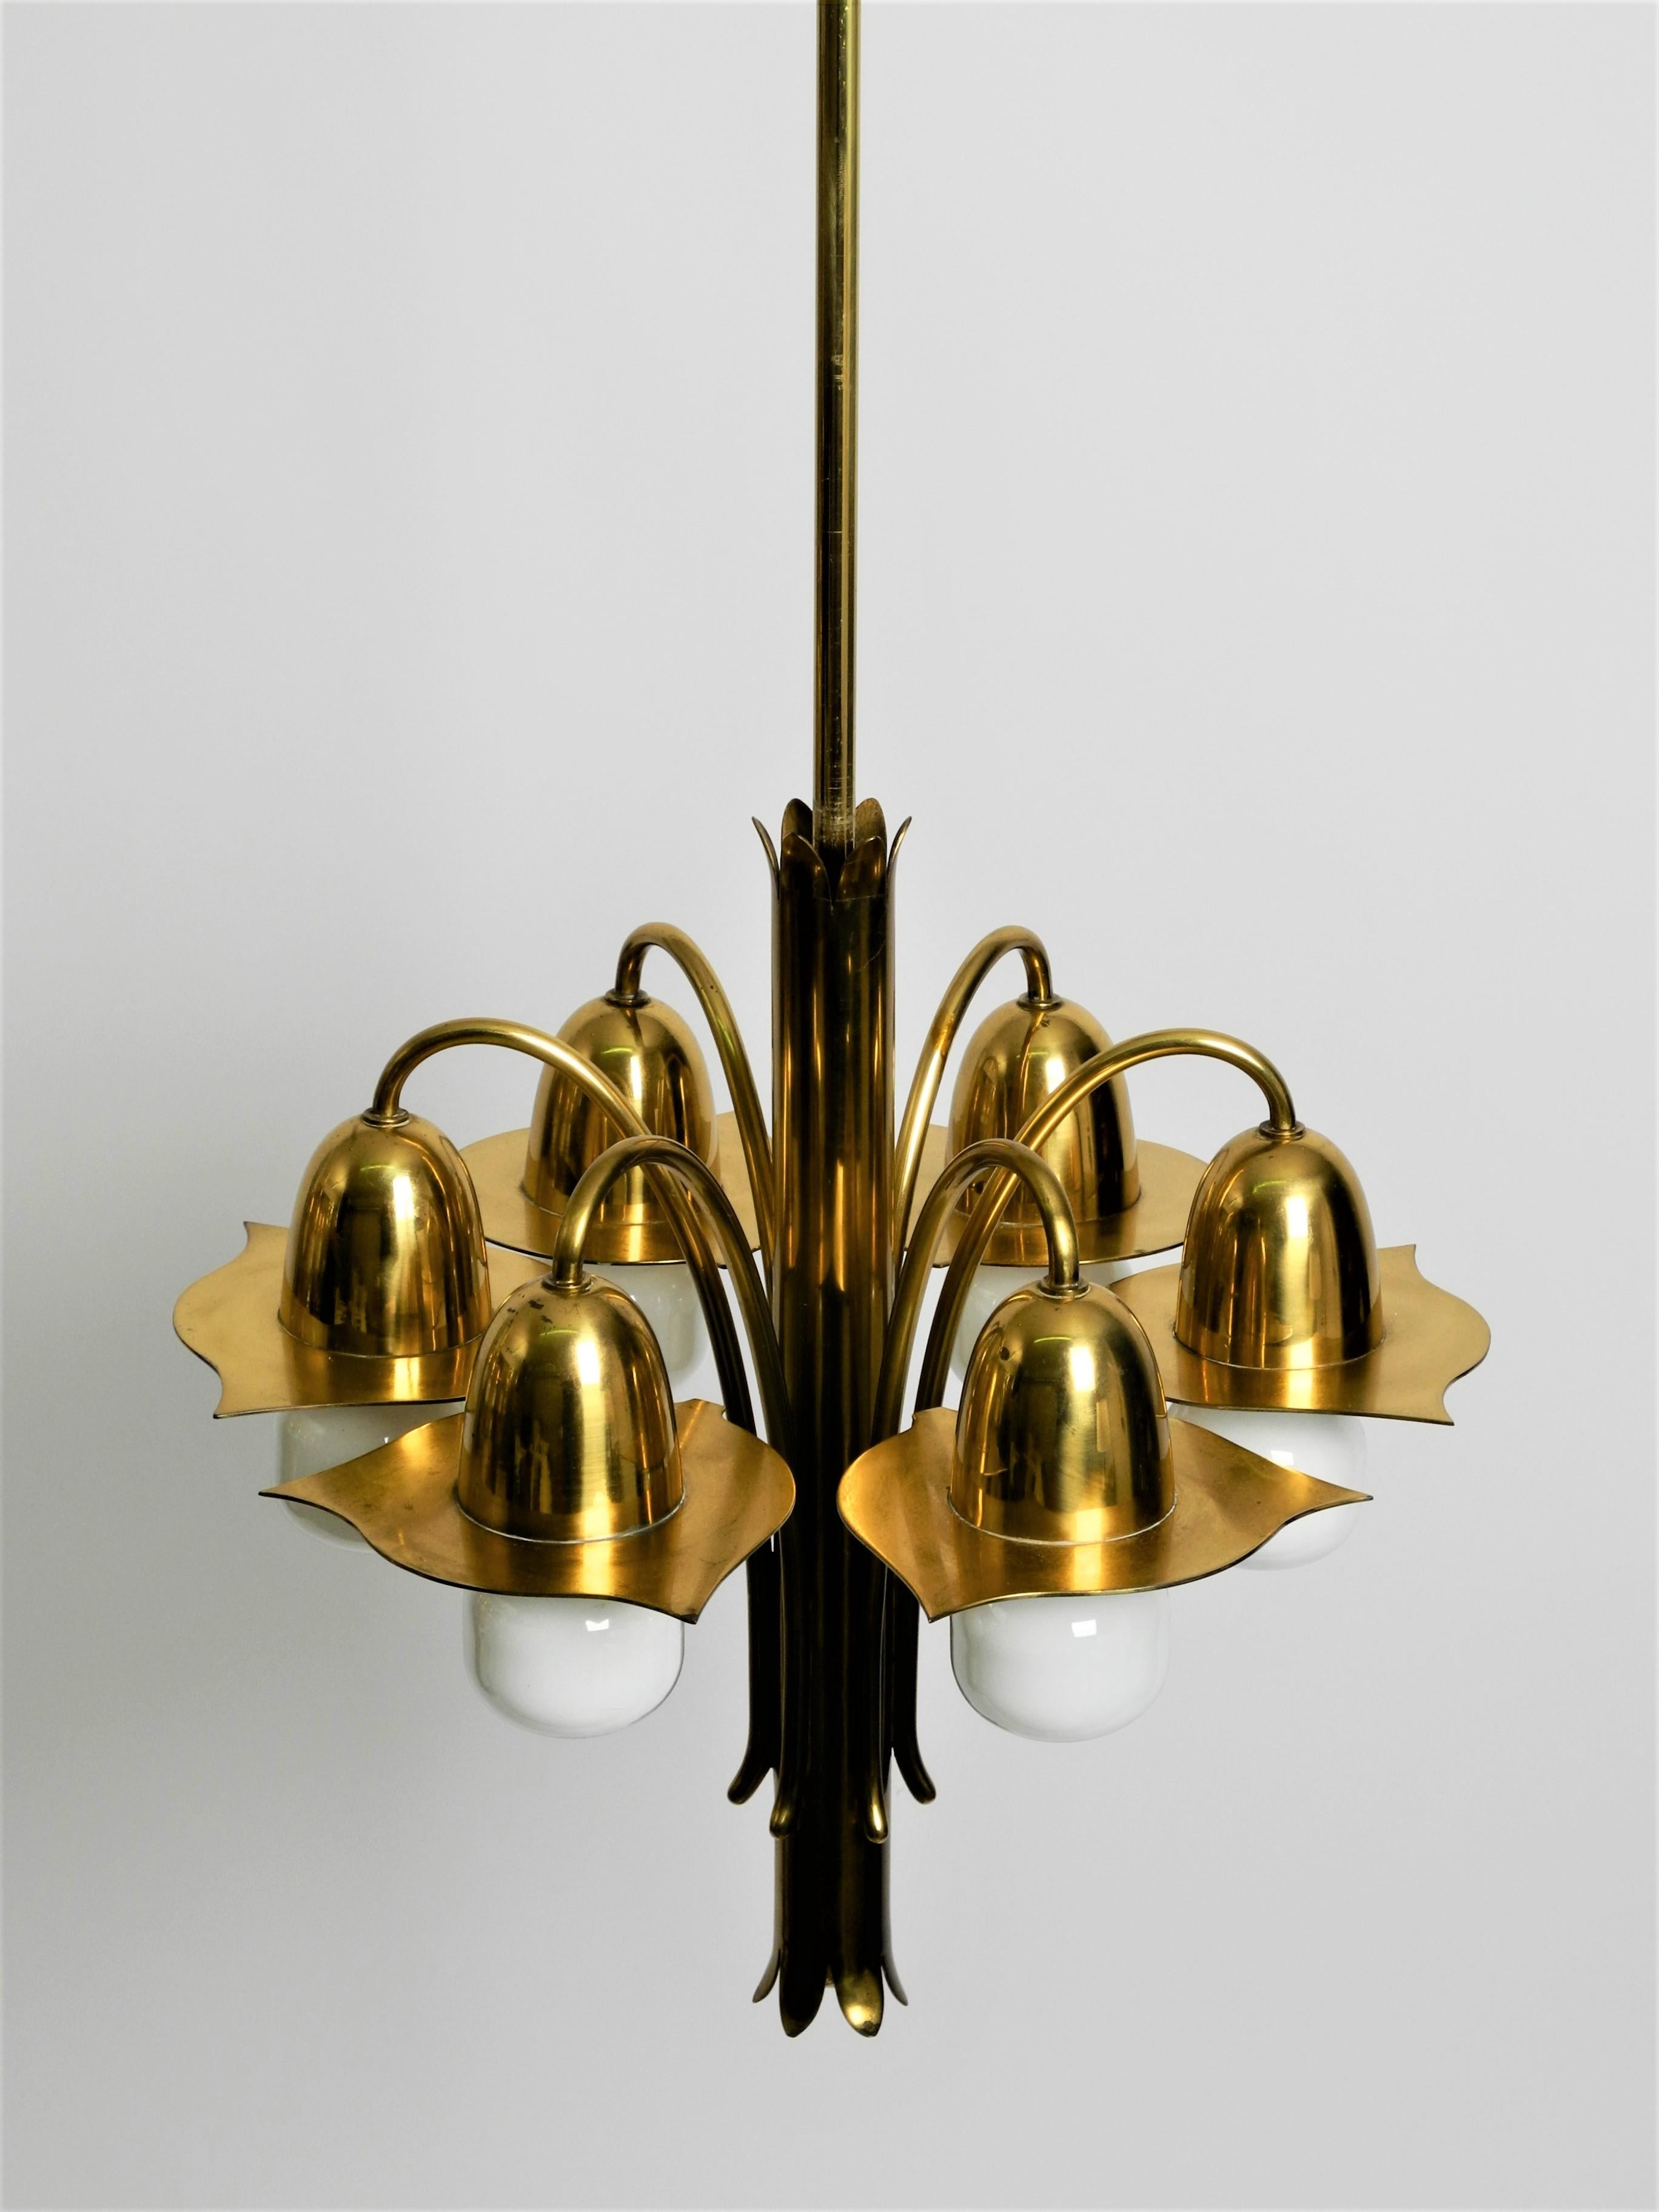 Pair of Richard Riemerschmid Pendant Lamps Chandeliers Art Nouveau, Germany 1920 In Good Condition For Sale In München, BY